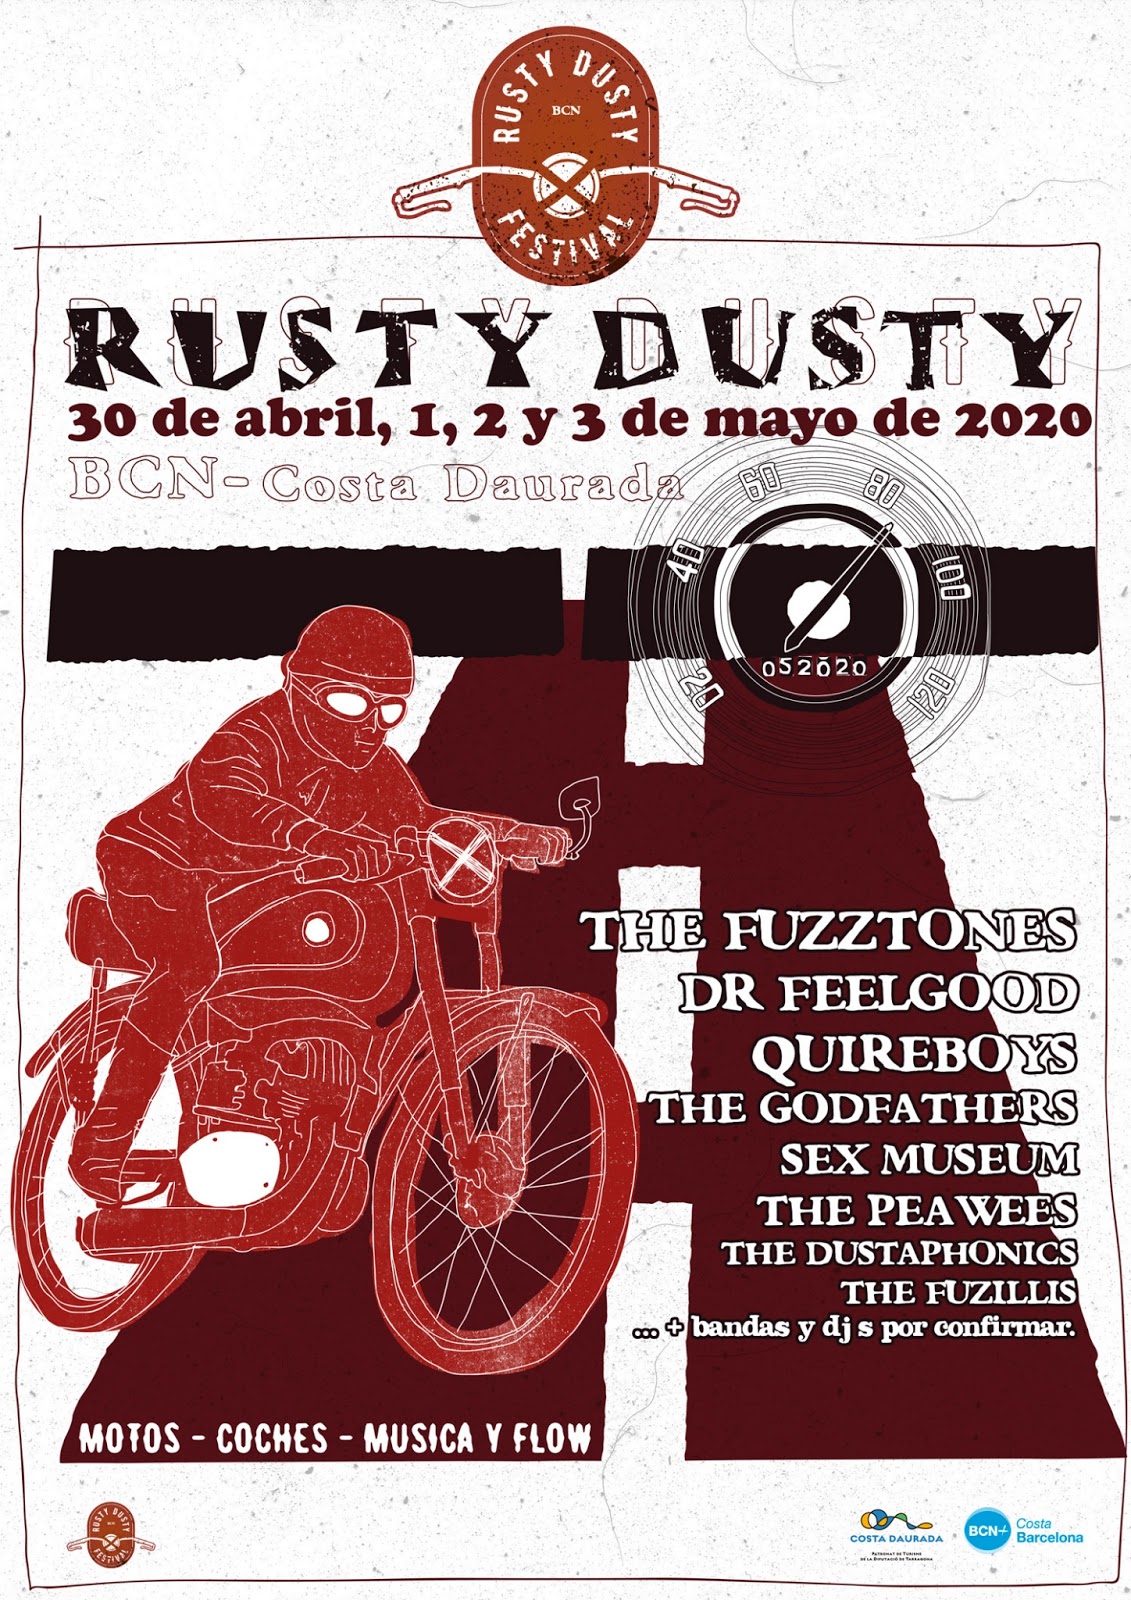 Rusty Dusty Fest - Fuzztones, Dr.Feelgood, The Quireboys, Godfathers, Sex Musem... 75439465_150373222981744_3170275464673492992_o